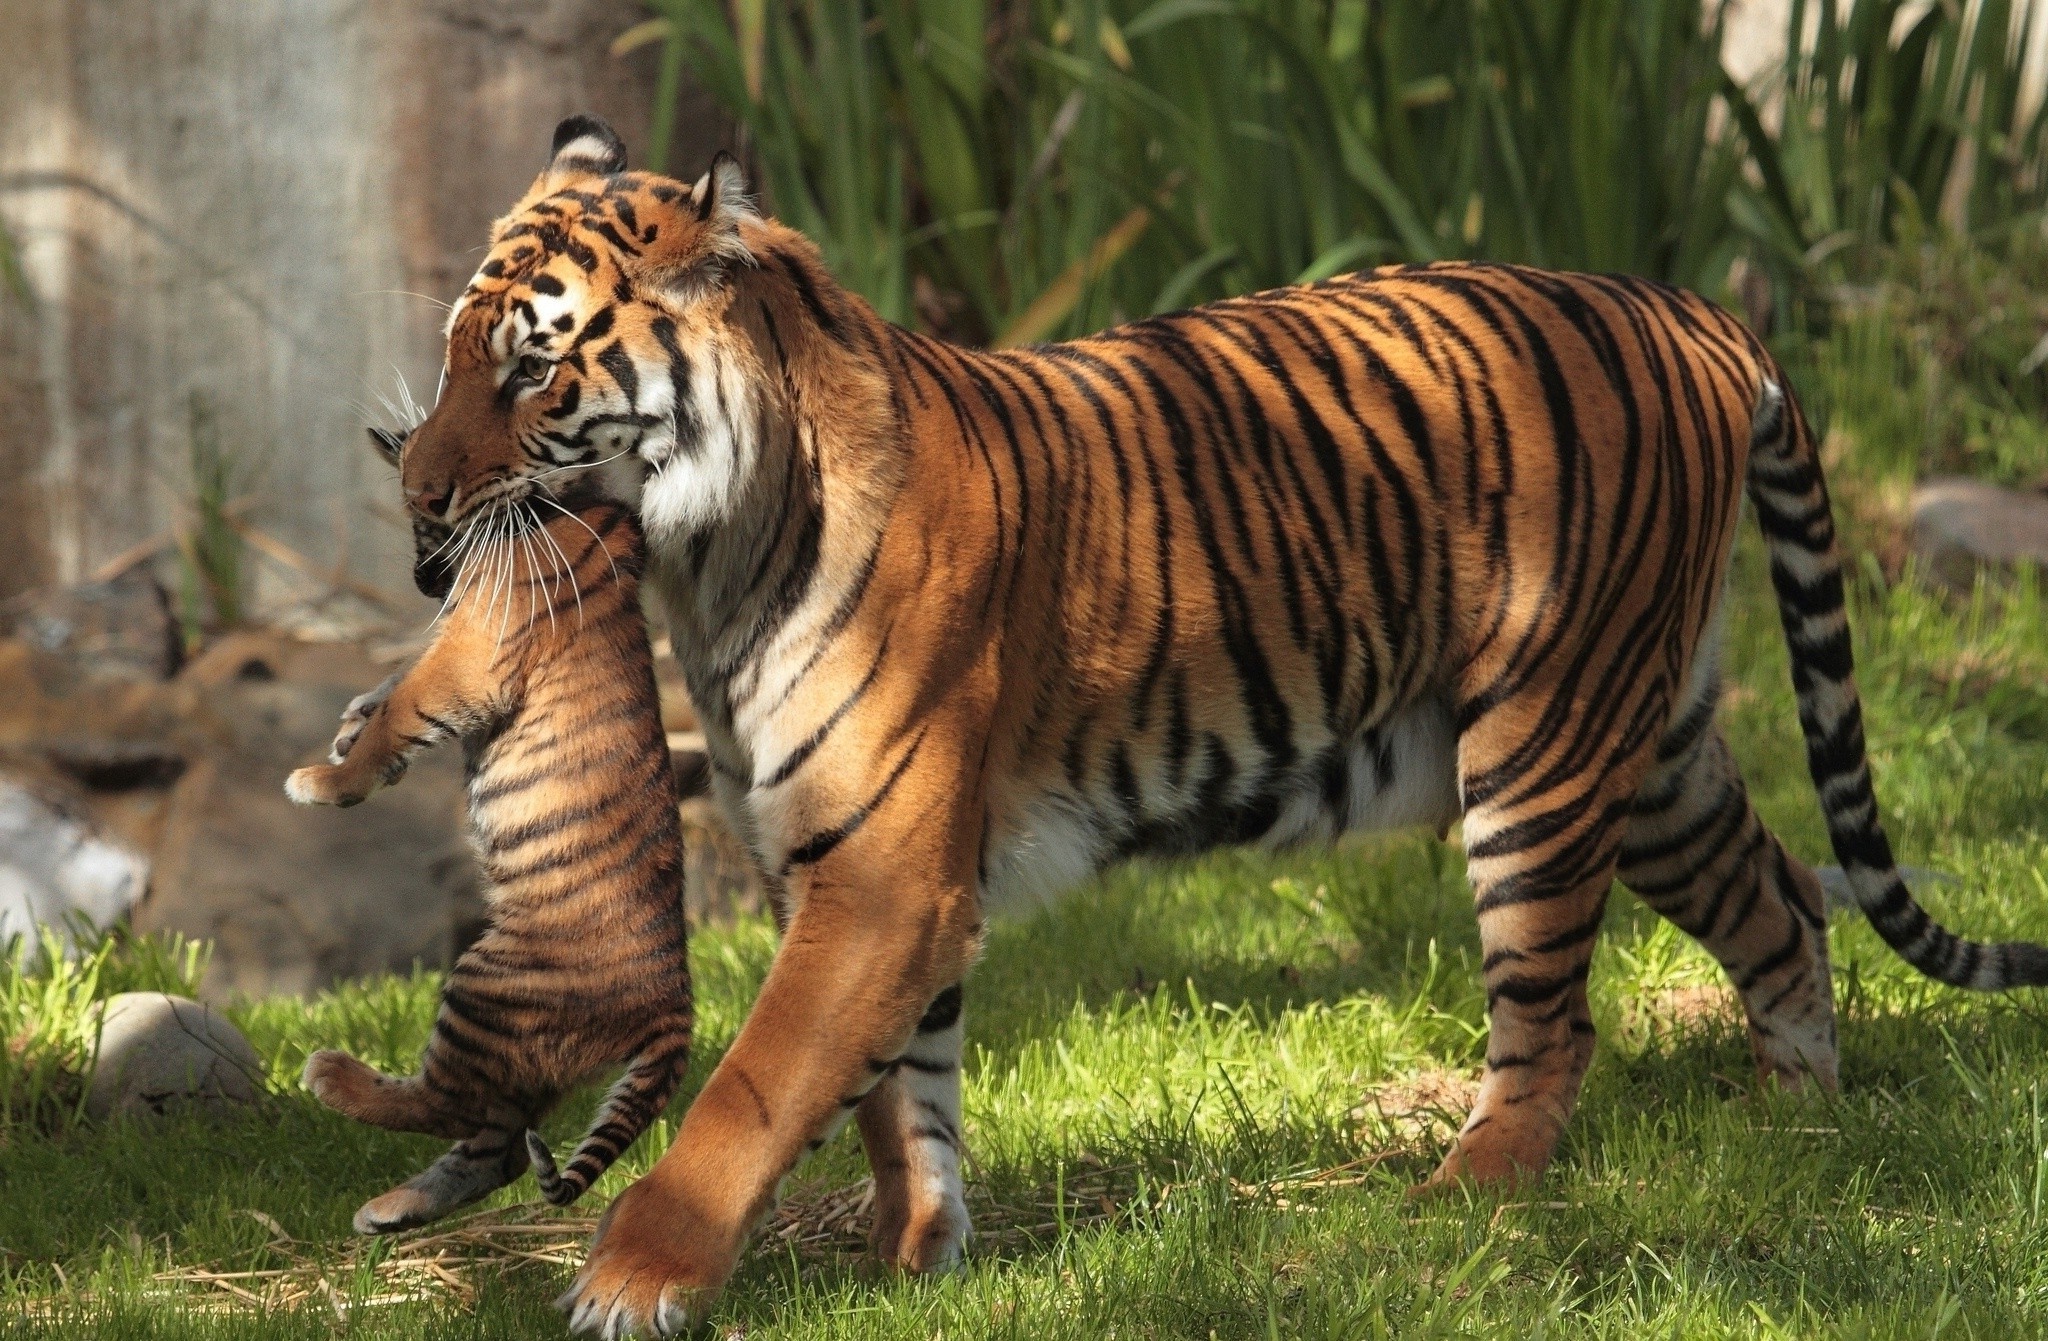 A tigress with a tiger cub in her teeth.